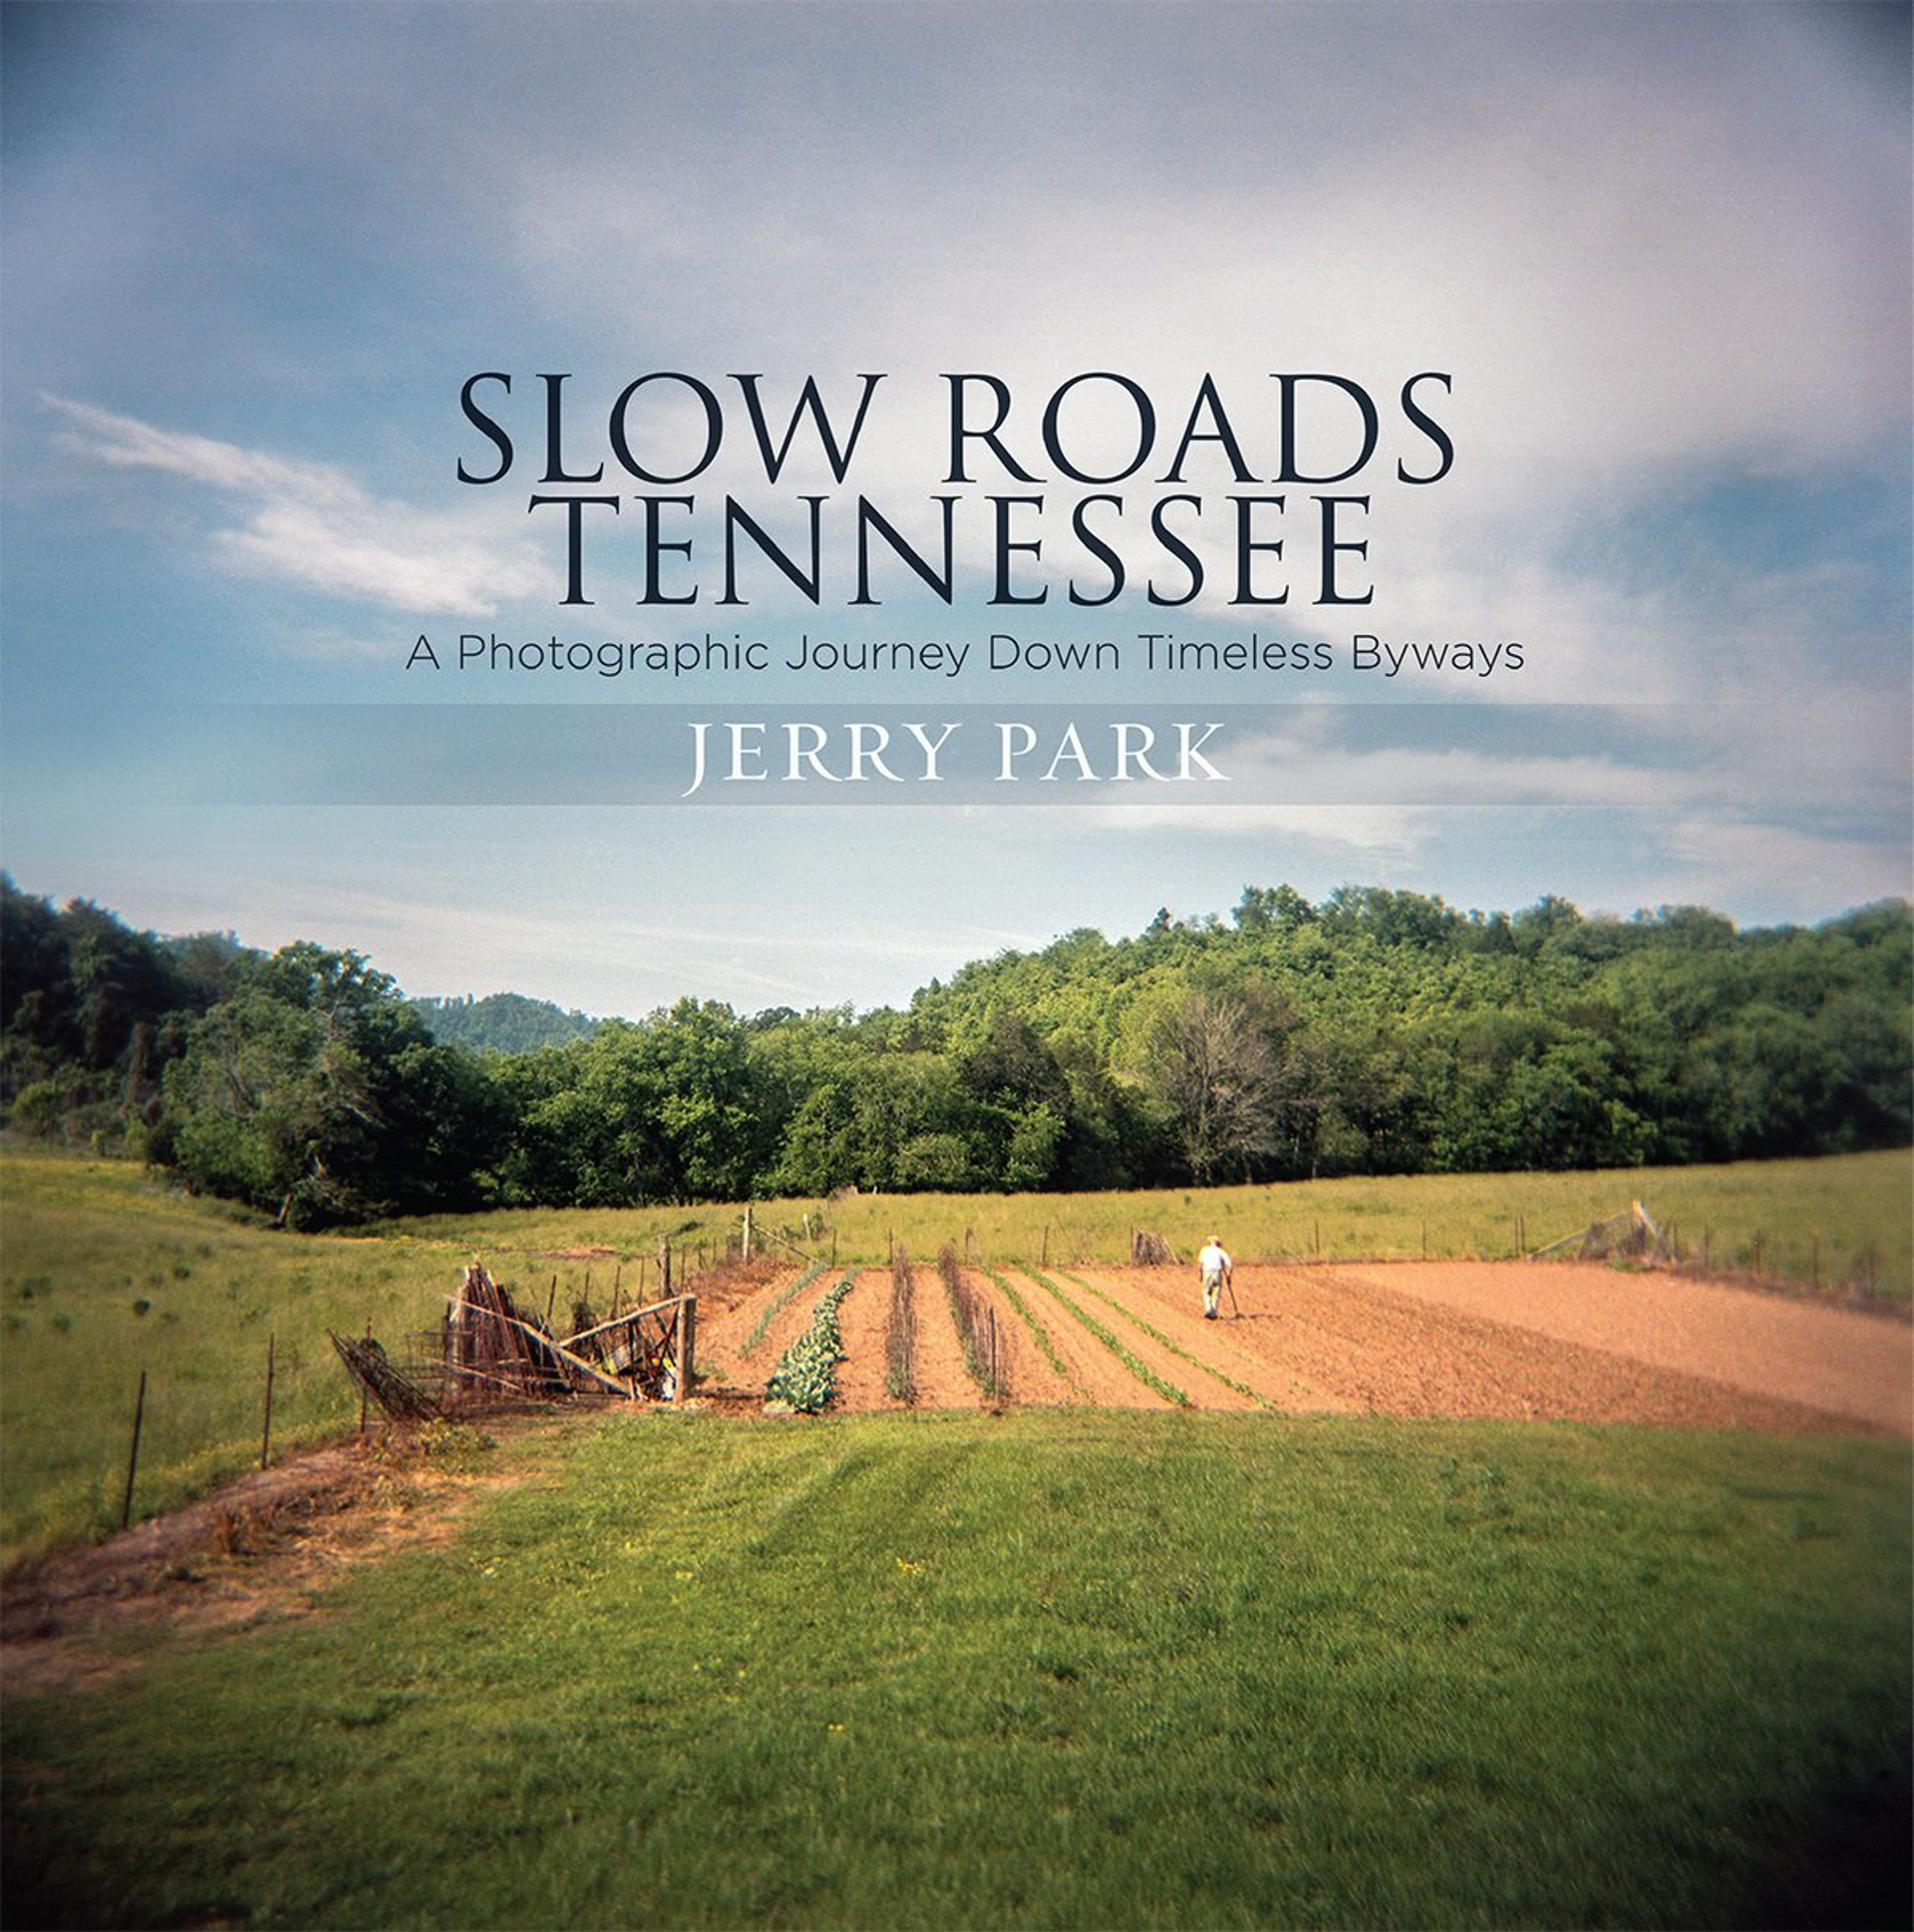 Slow Roads Tennessee: A Photographic Journey Down Timeless Byways by Jerry Park